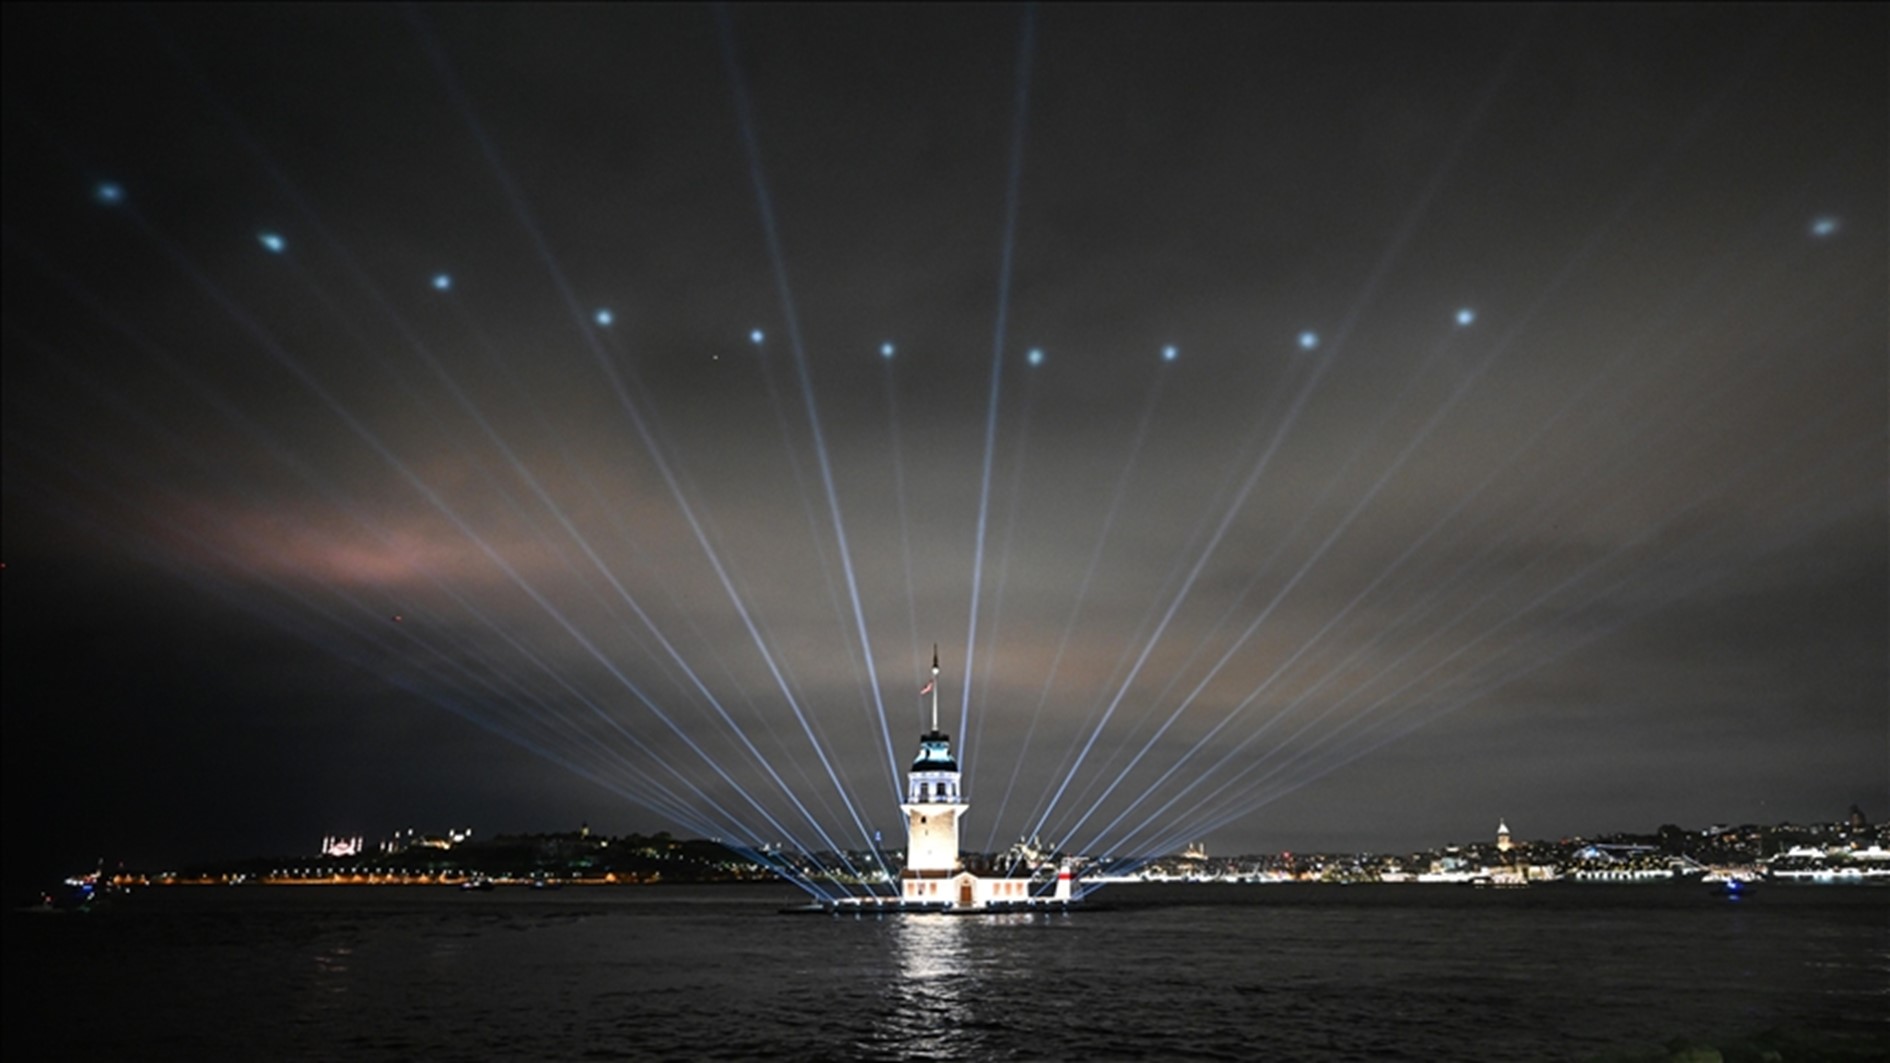 Istanbul's Maiden's Tower reopens after 2-year restoration